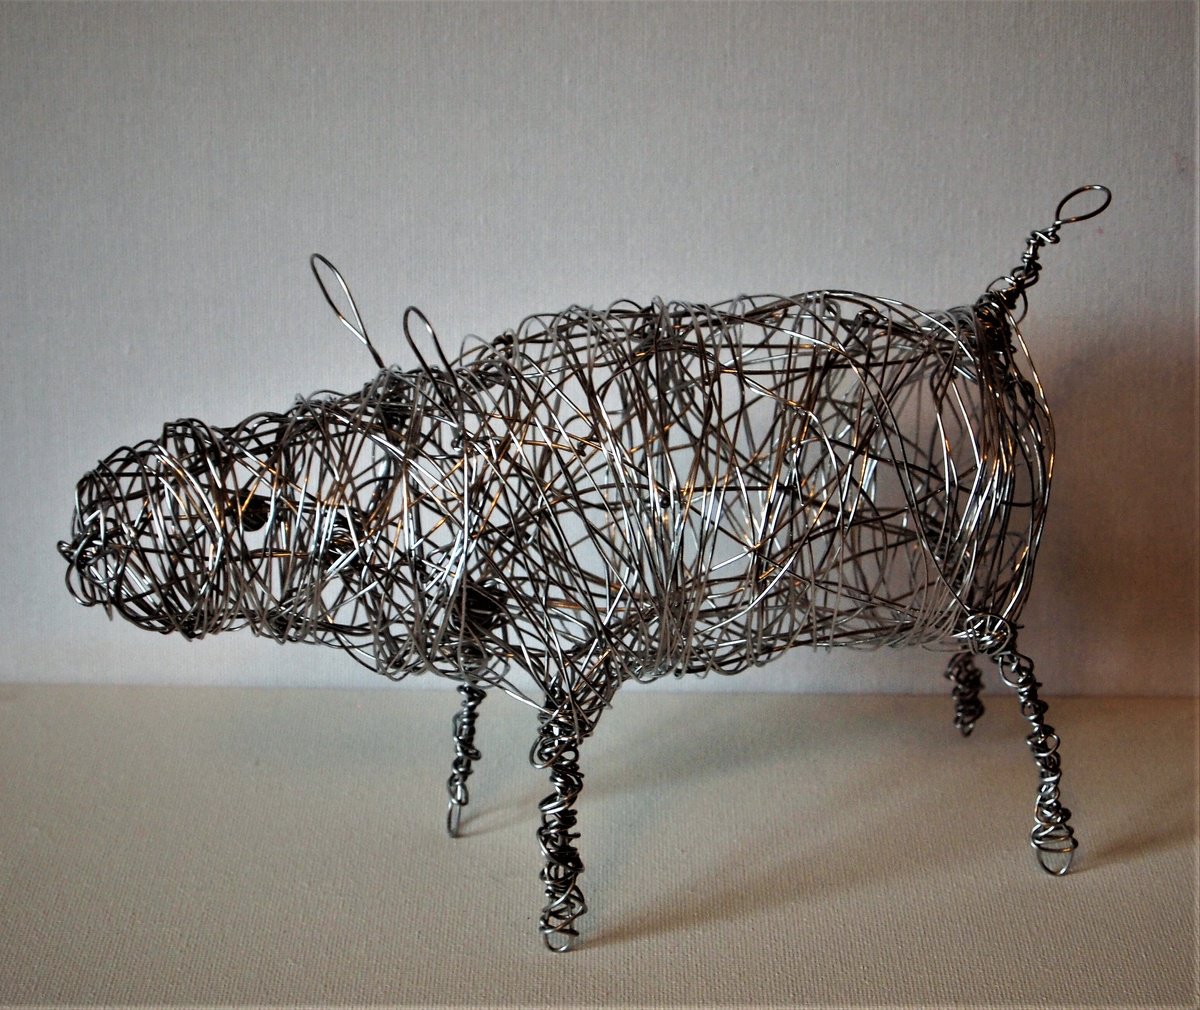 Silver wire Percy Pig sculpture by Steph Morgan